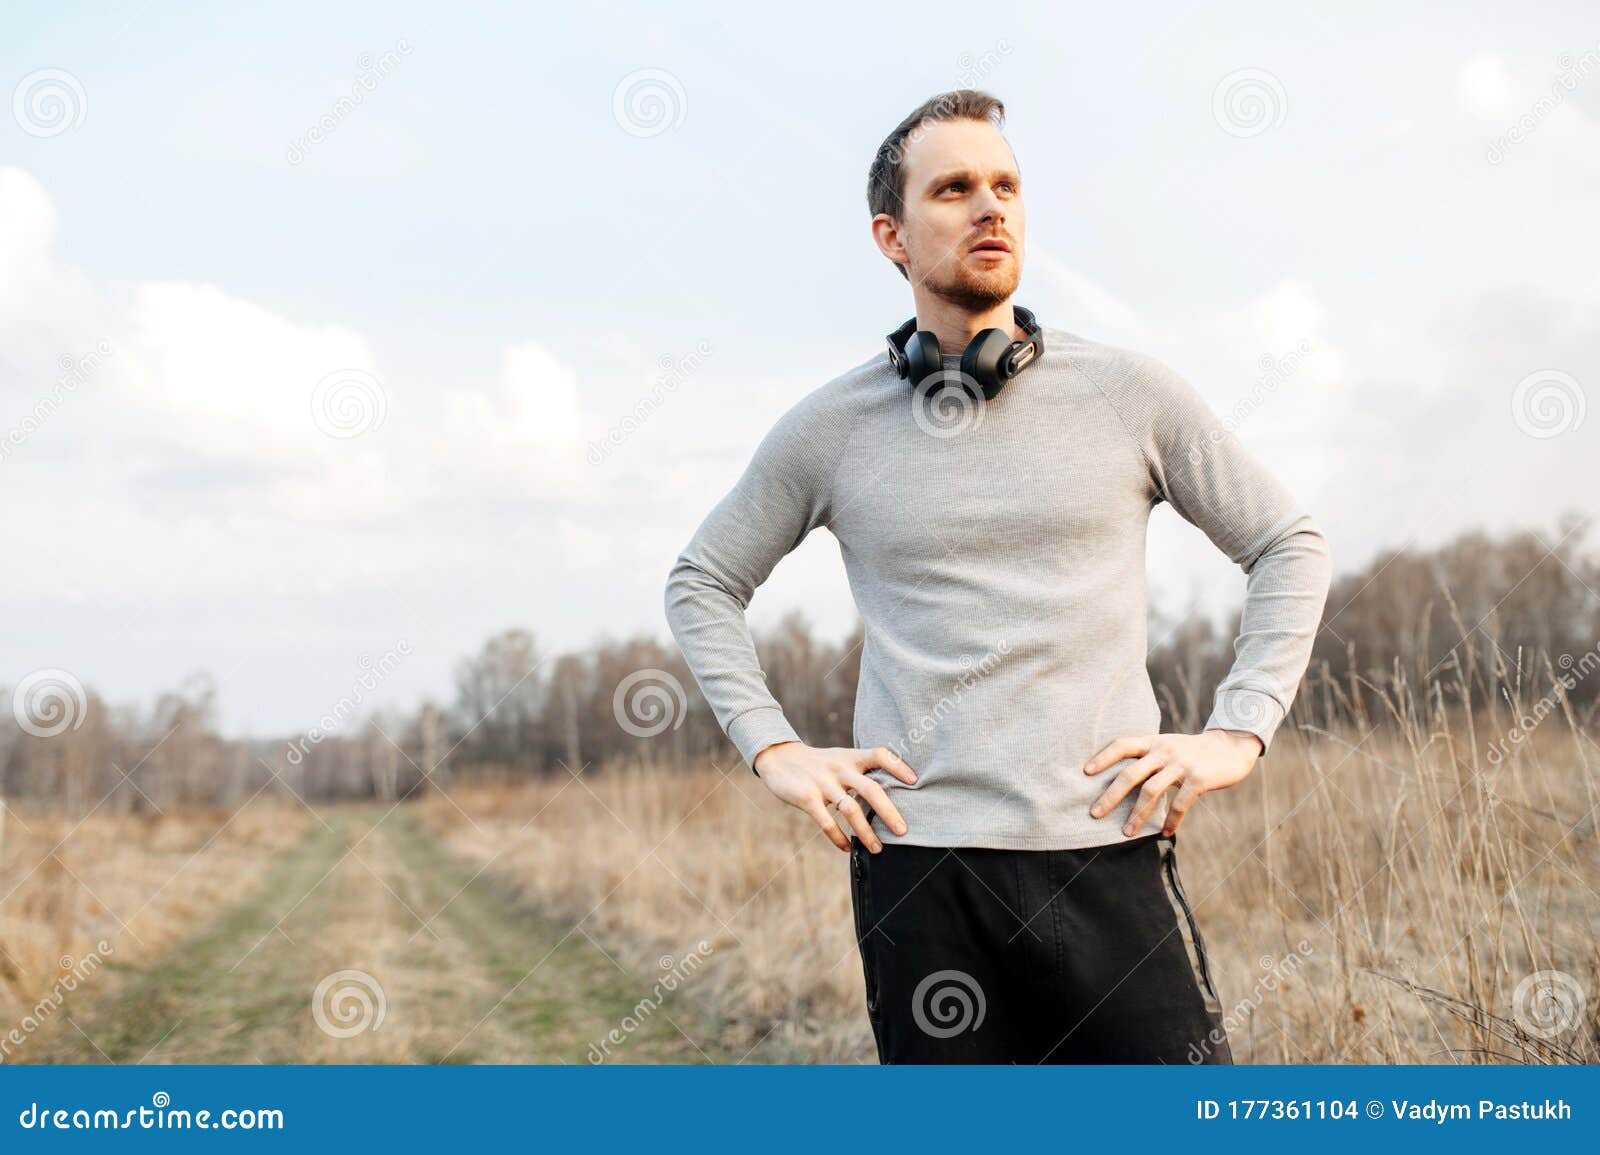 Active Lifestyle. Attractive Young Guy Outdoors Stock Photo - Image of ...